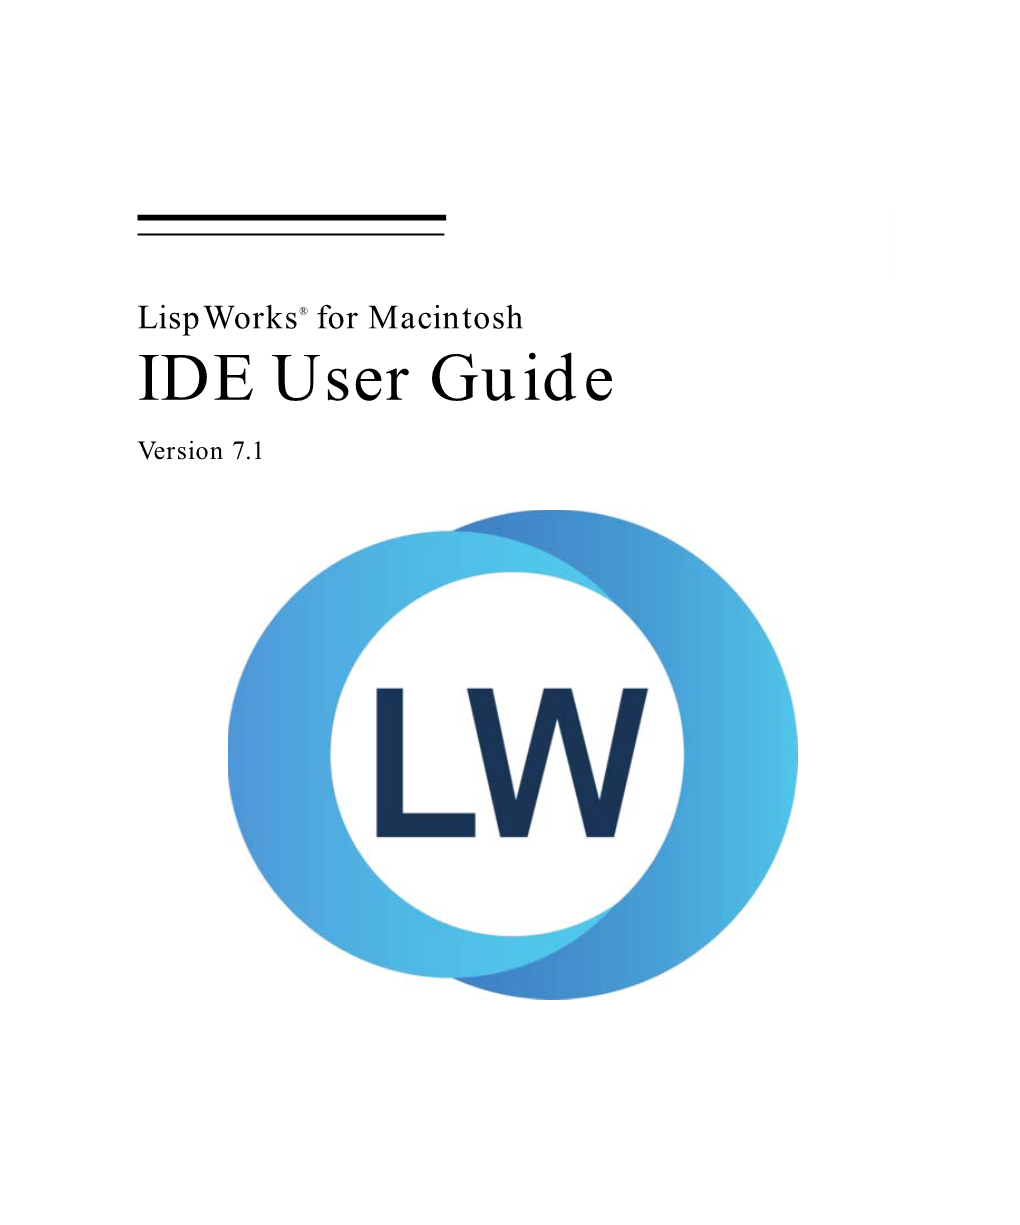 IDE User Guide Version 7.1 Copyright and Trademarks Lispworks IDE User Guide (Macintosh Version) Version 7.1 September 2017 Copyright © 2017 by Lispworks Ltd